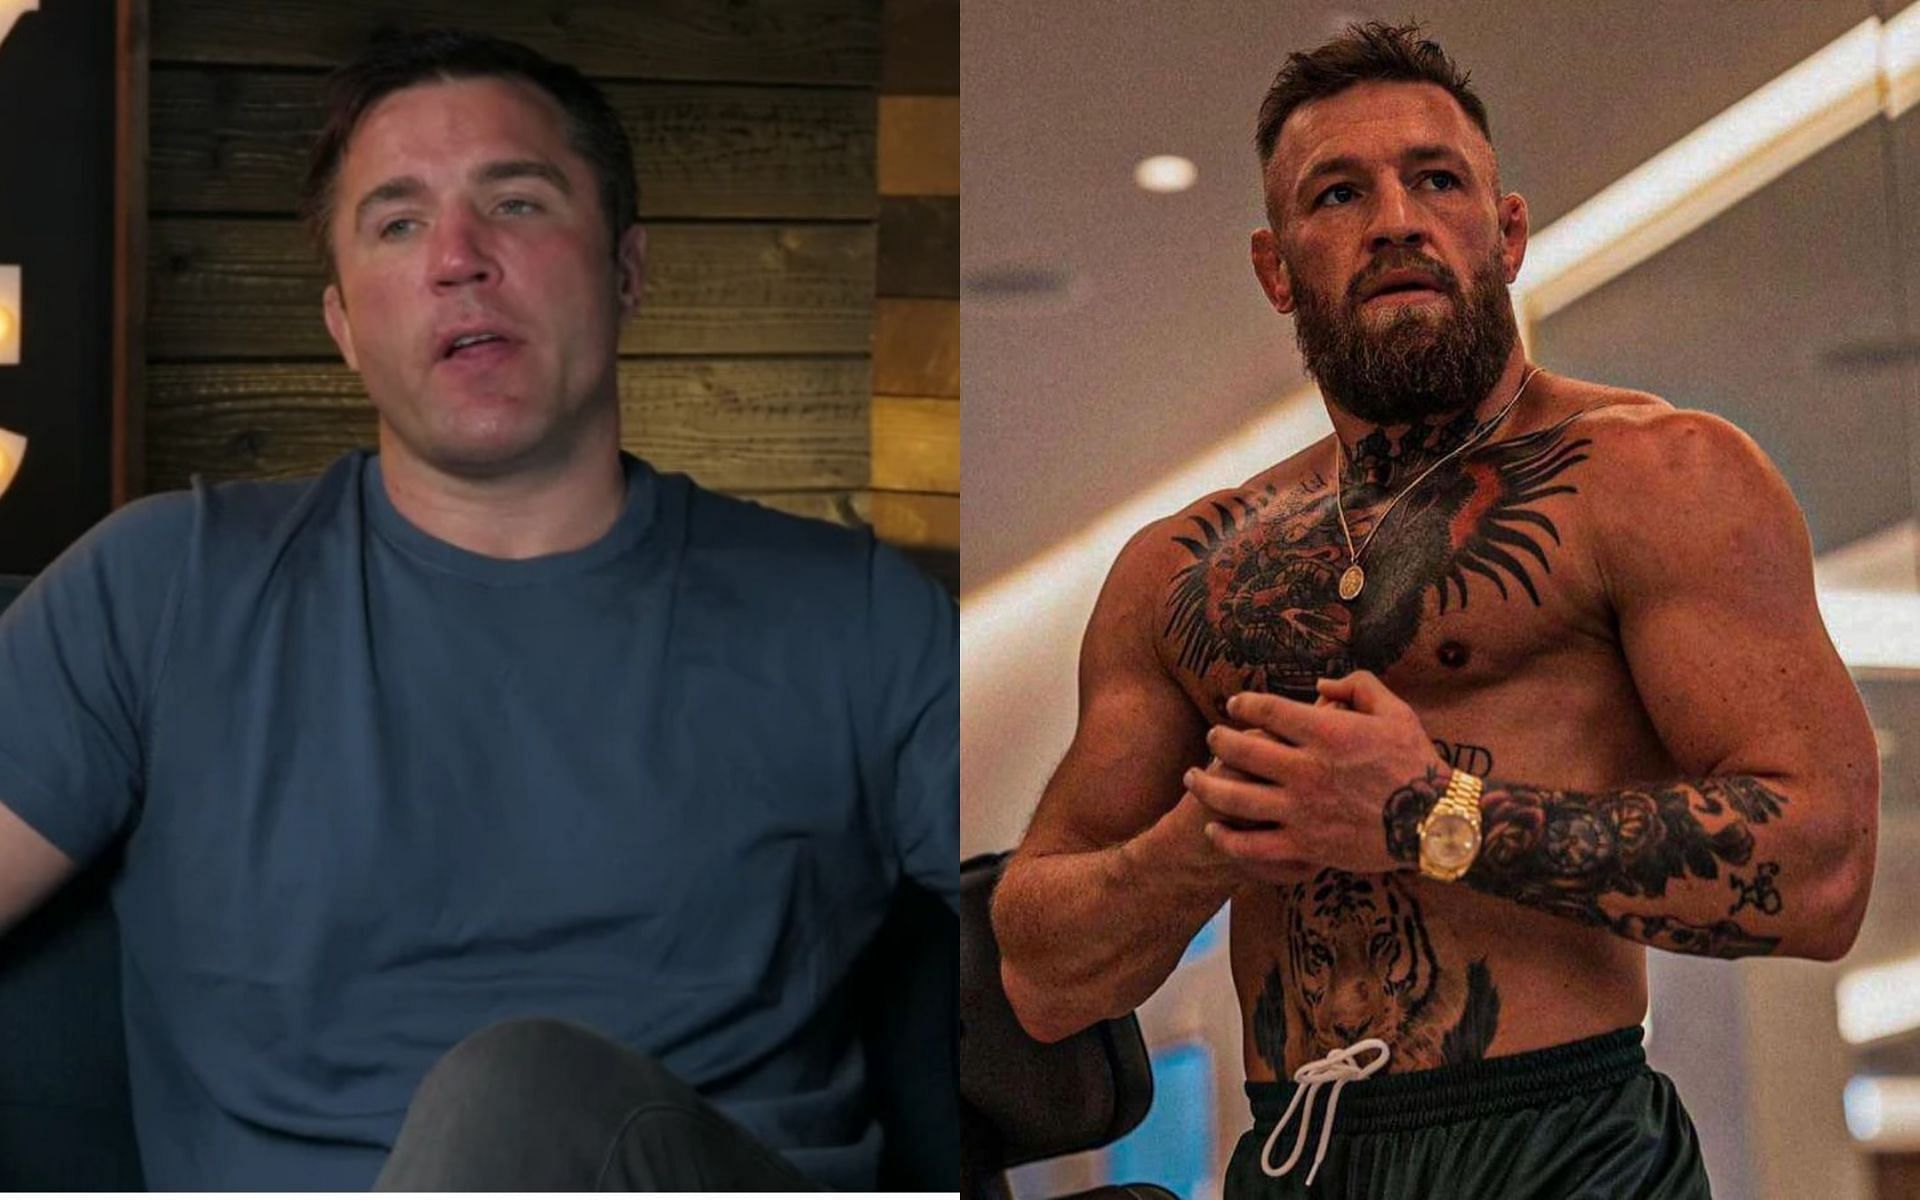 Chael Sonnen (left) and Conor McGregor (right) [Photos via YouTube.com &amp; @thenotoriousmma on Instagram]